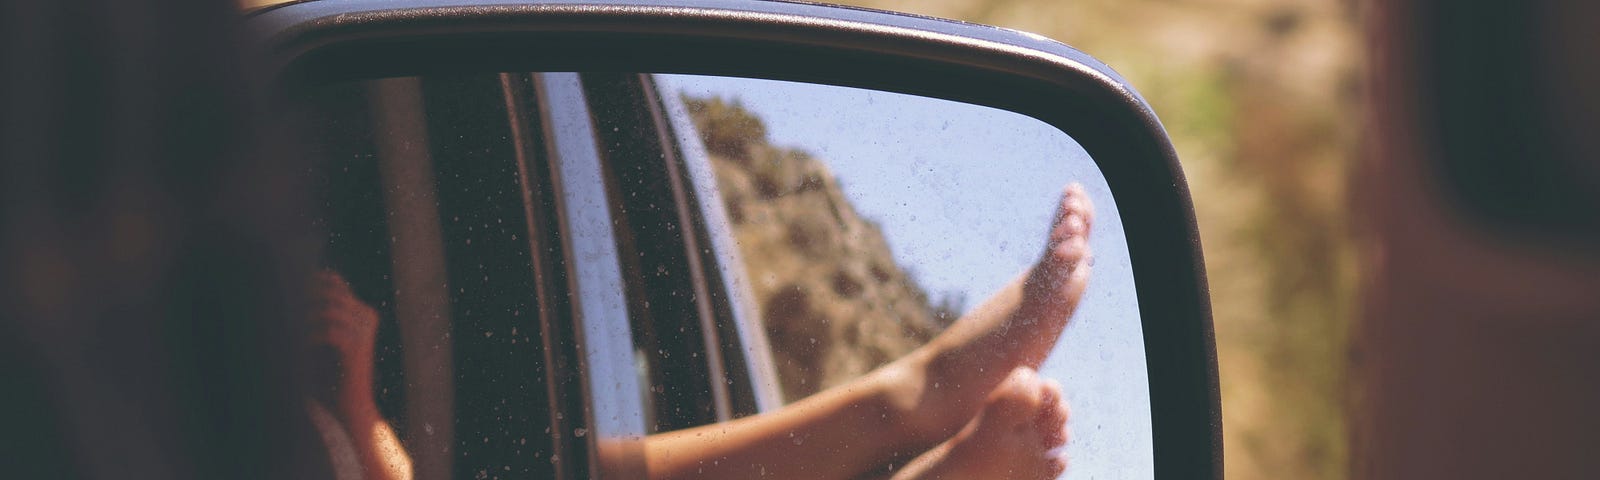 A reflection of bare feet sticking out of a moving car window, captured in the side mirror during a sunny drive through a rural area.